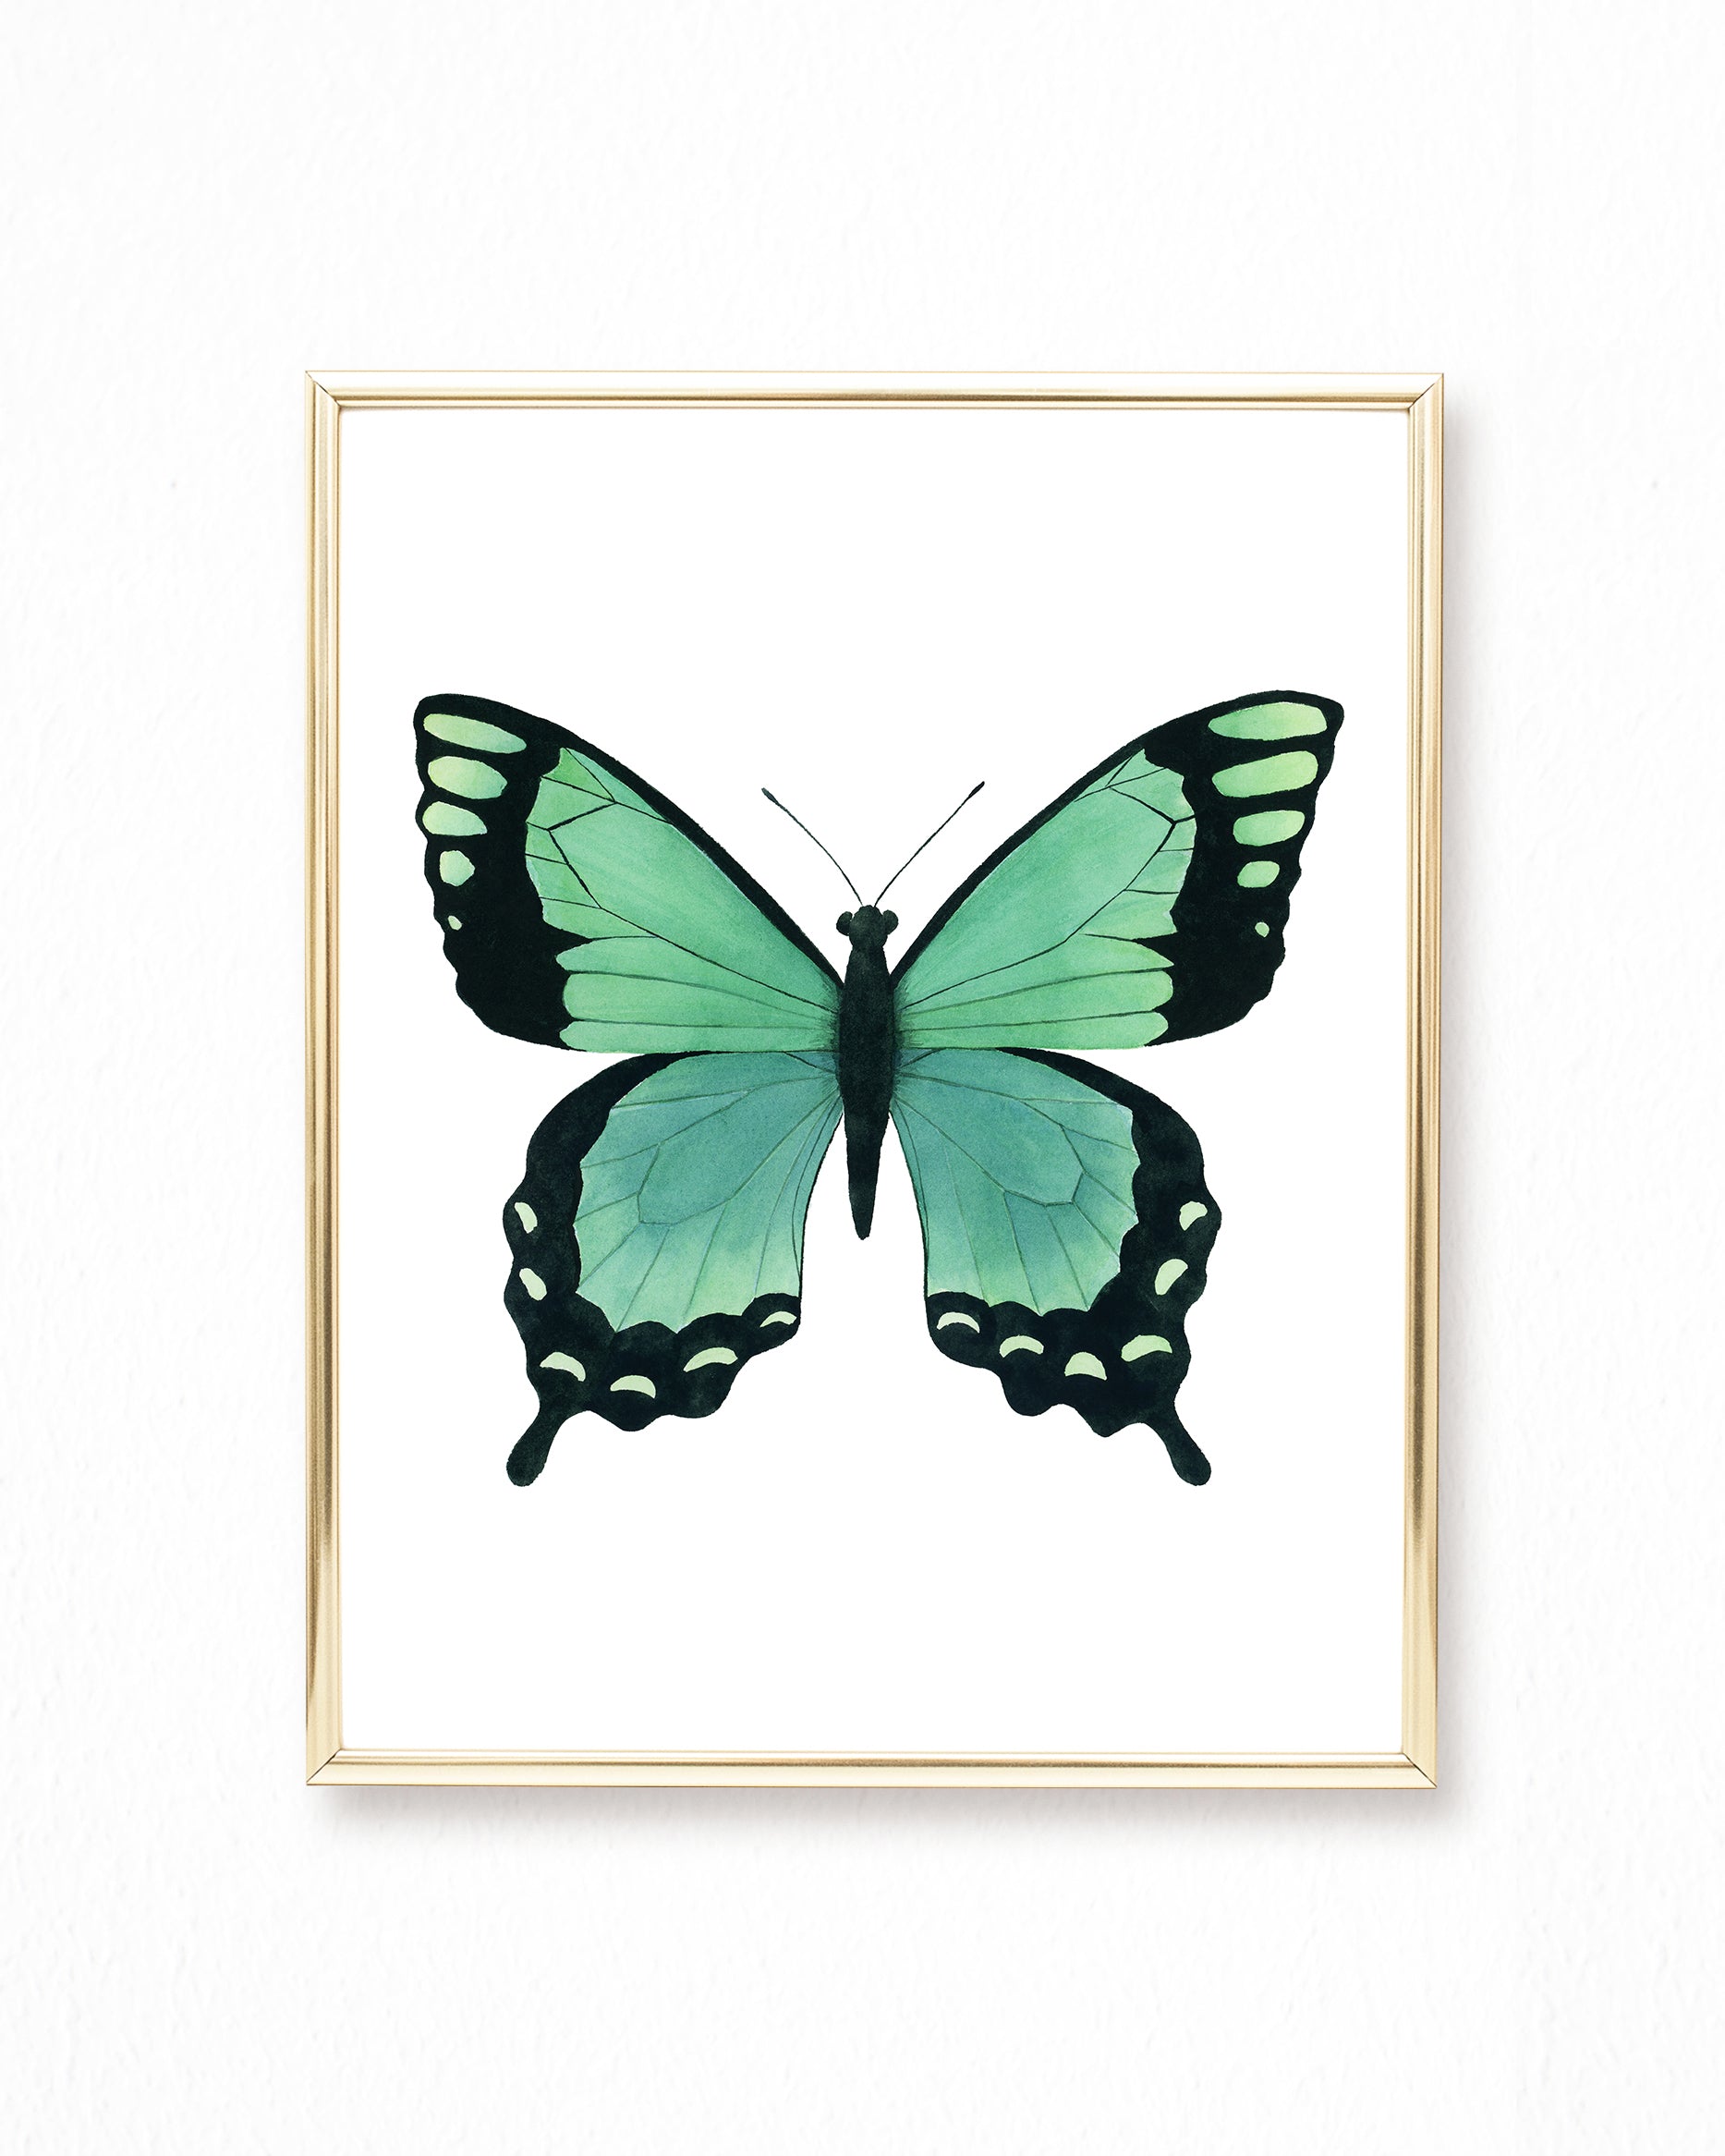 Watercolor Butterflies Paintings Collection - Set of 6